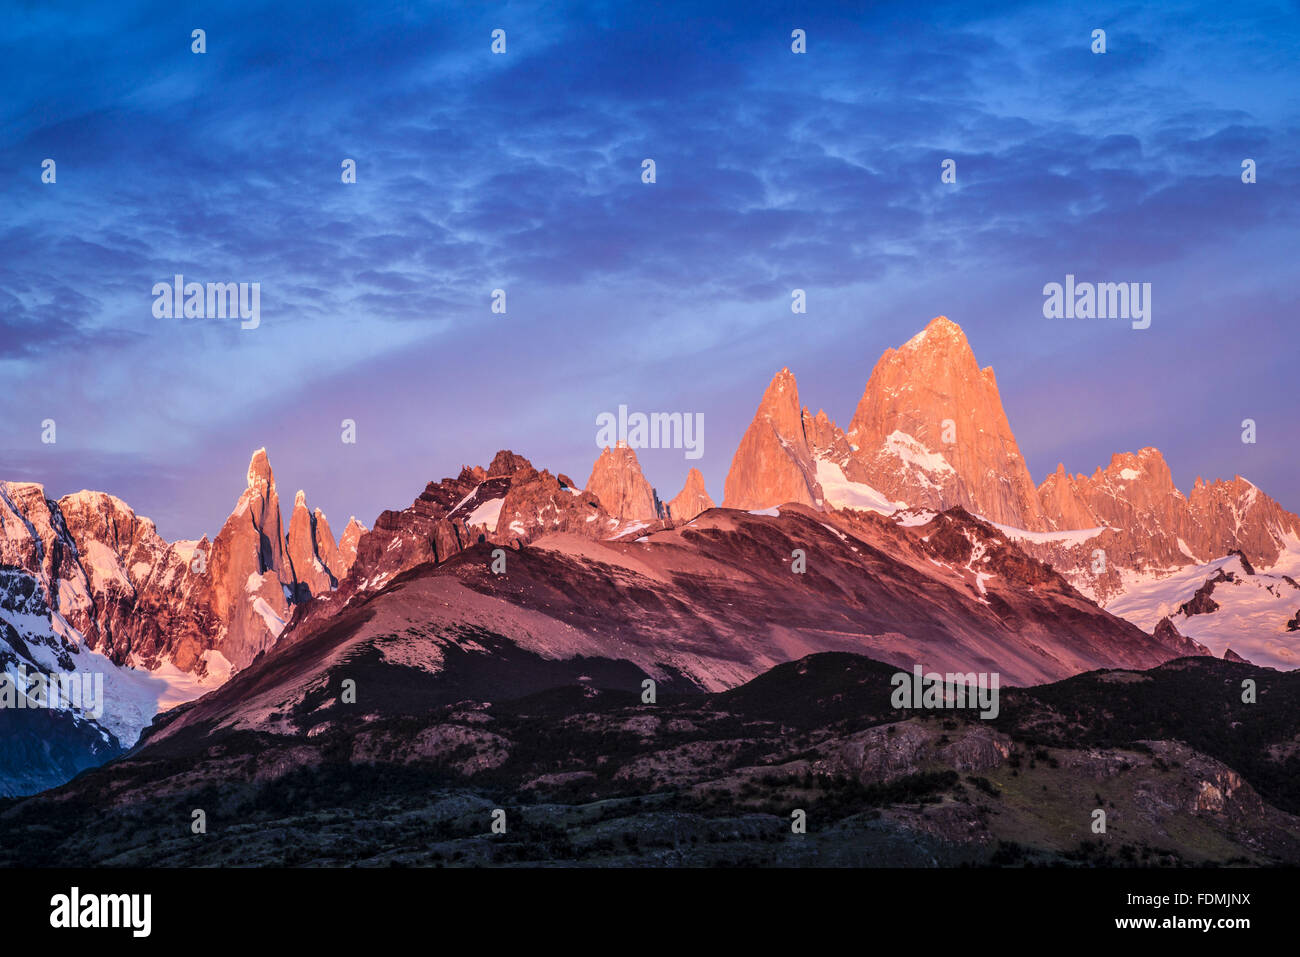 Landscape with Mount Fitz Roy and Cerro Torre at dawn Stock Photo